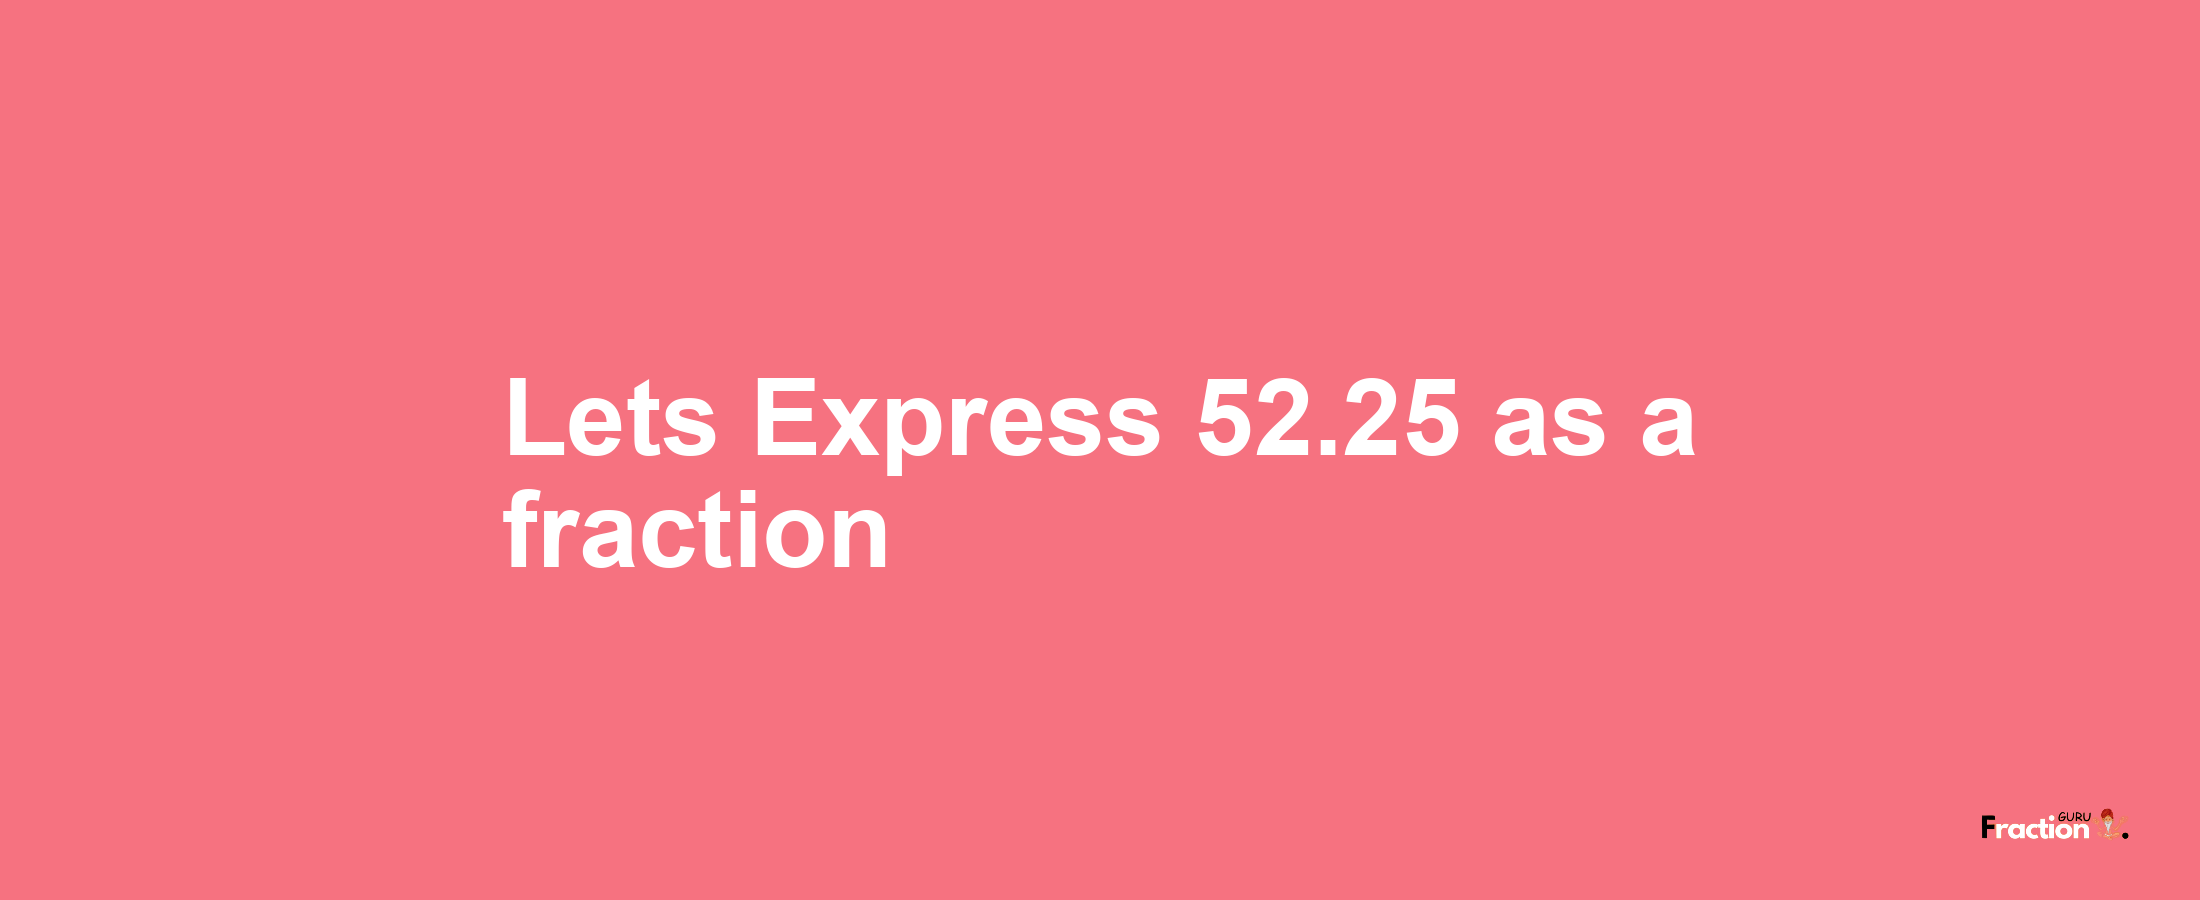 Lets Express 52.25 as afraction